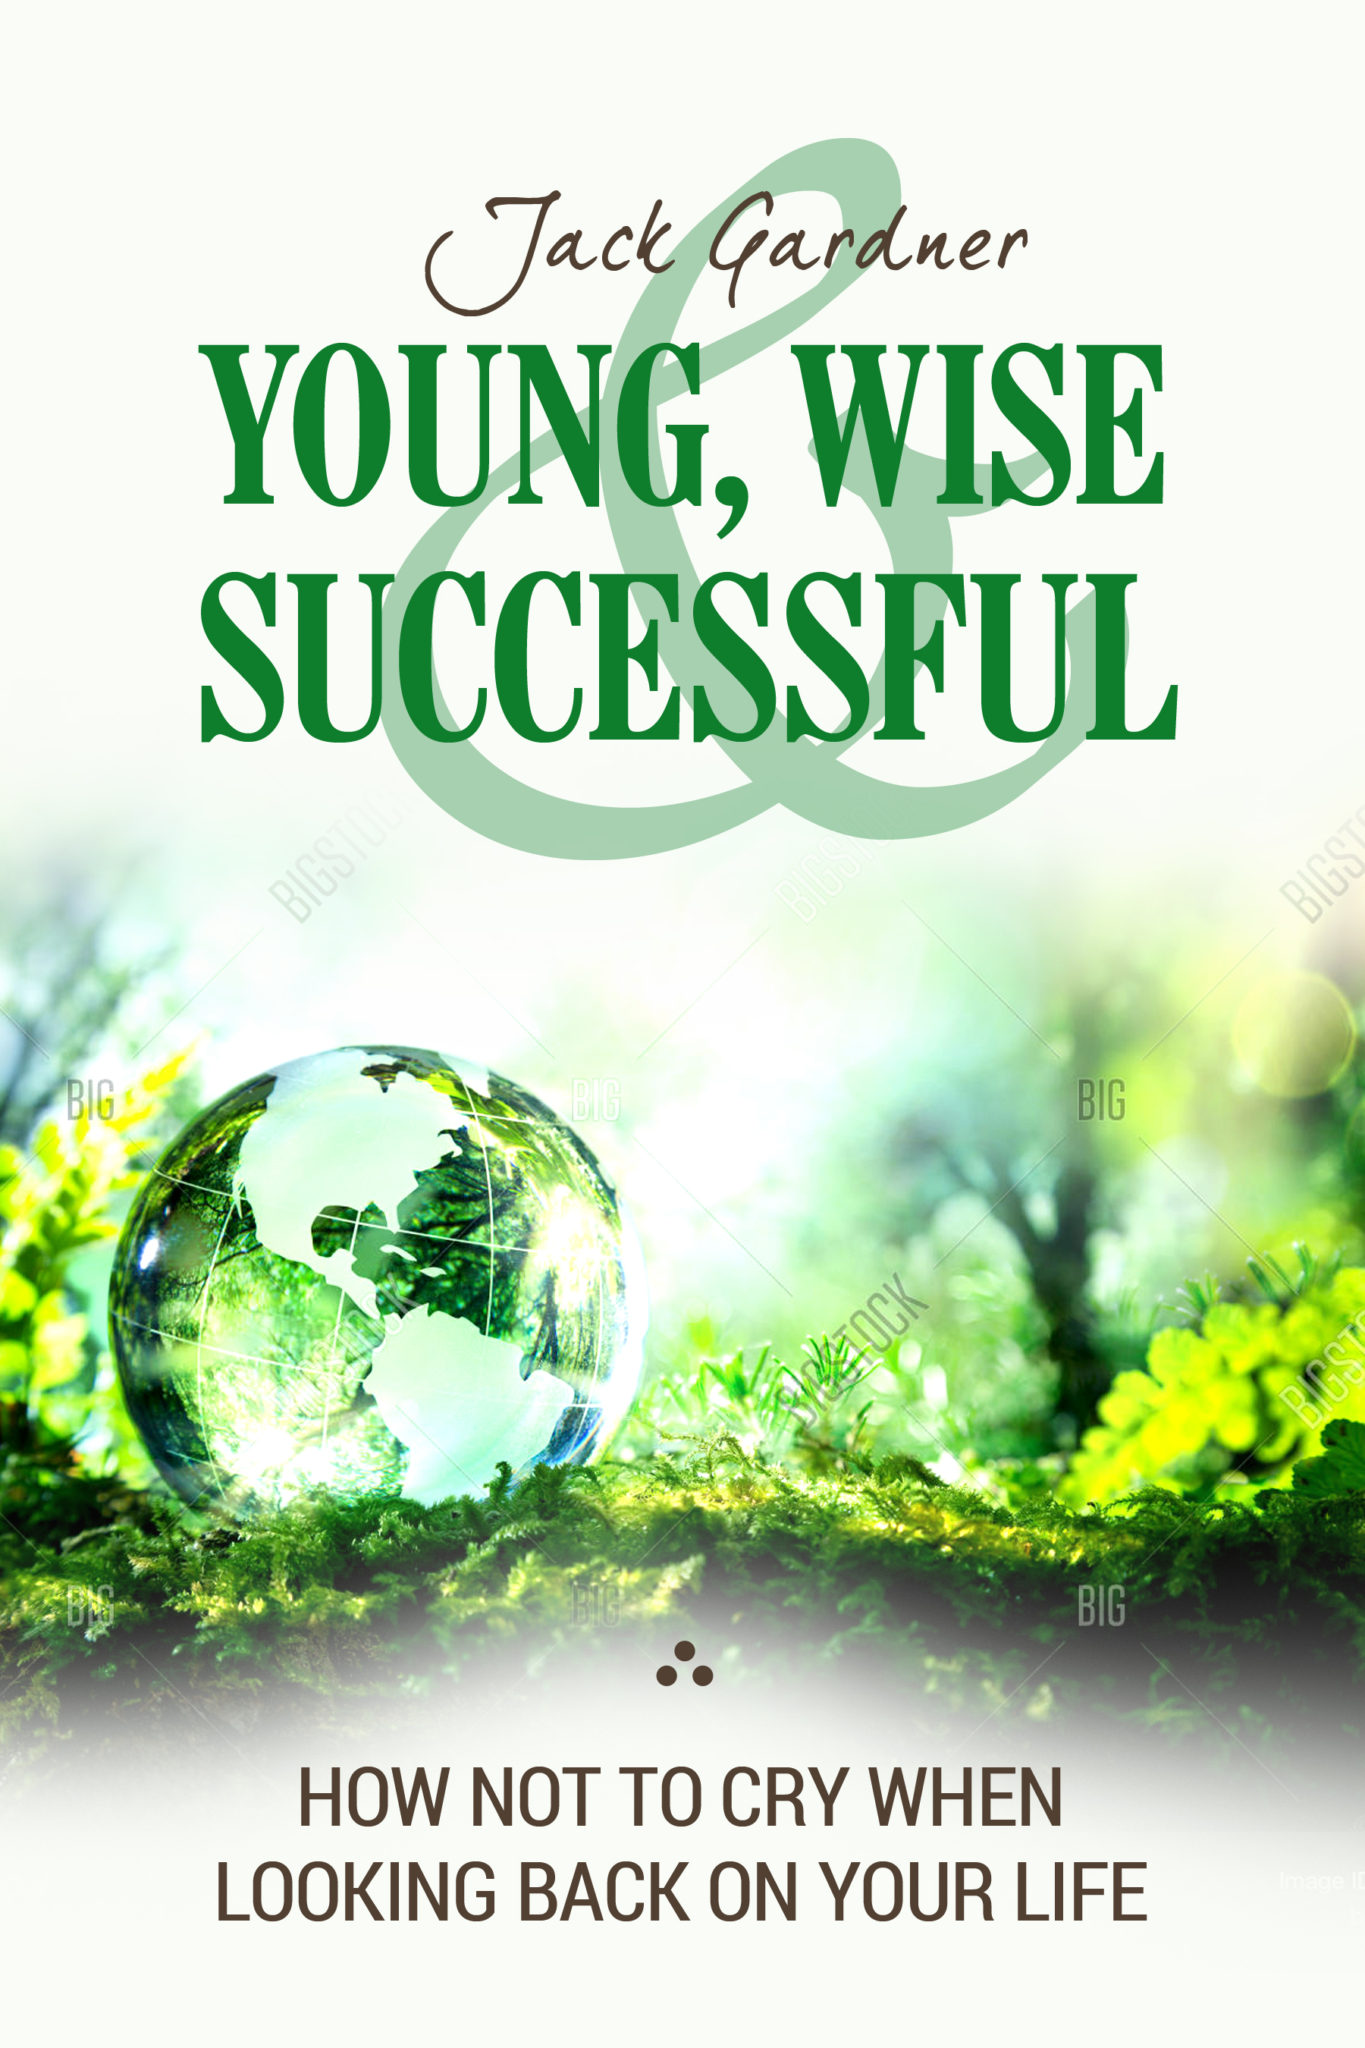 FREE: Young Wise Successful by Jack Gardner